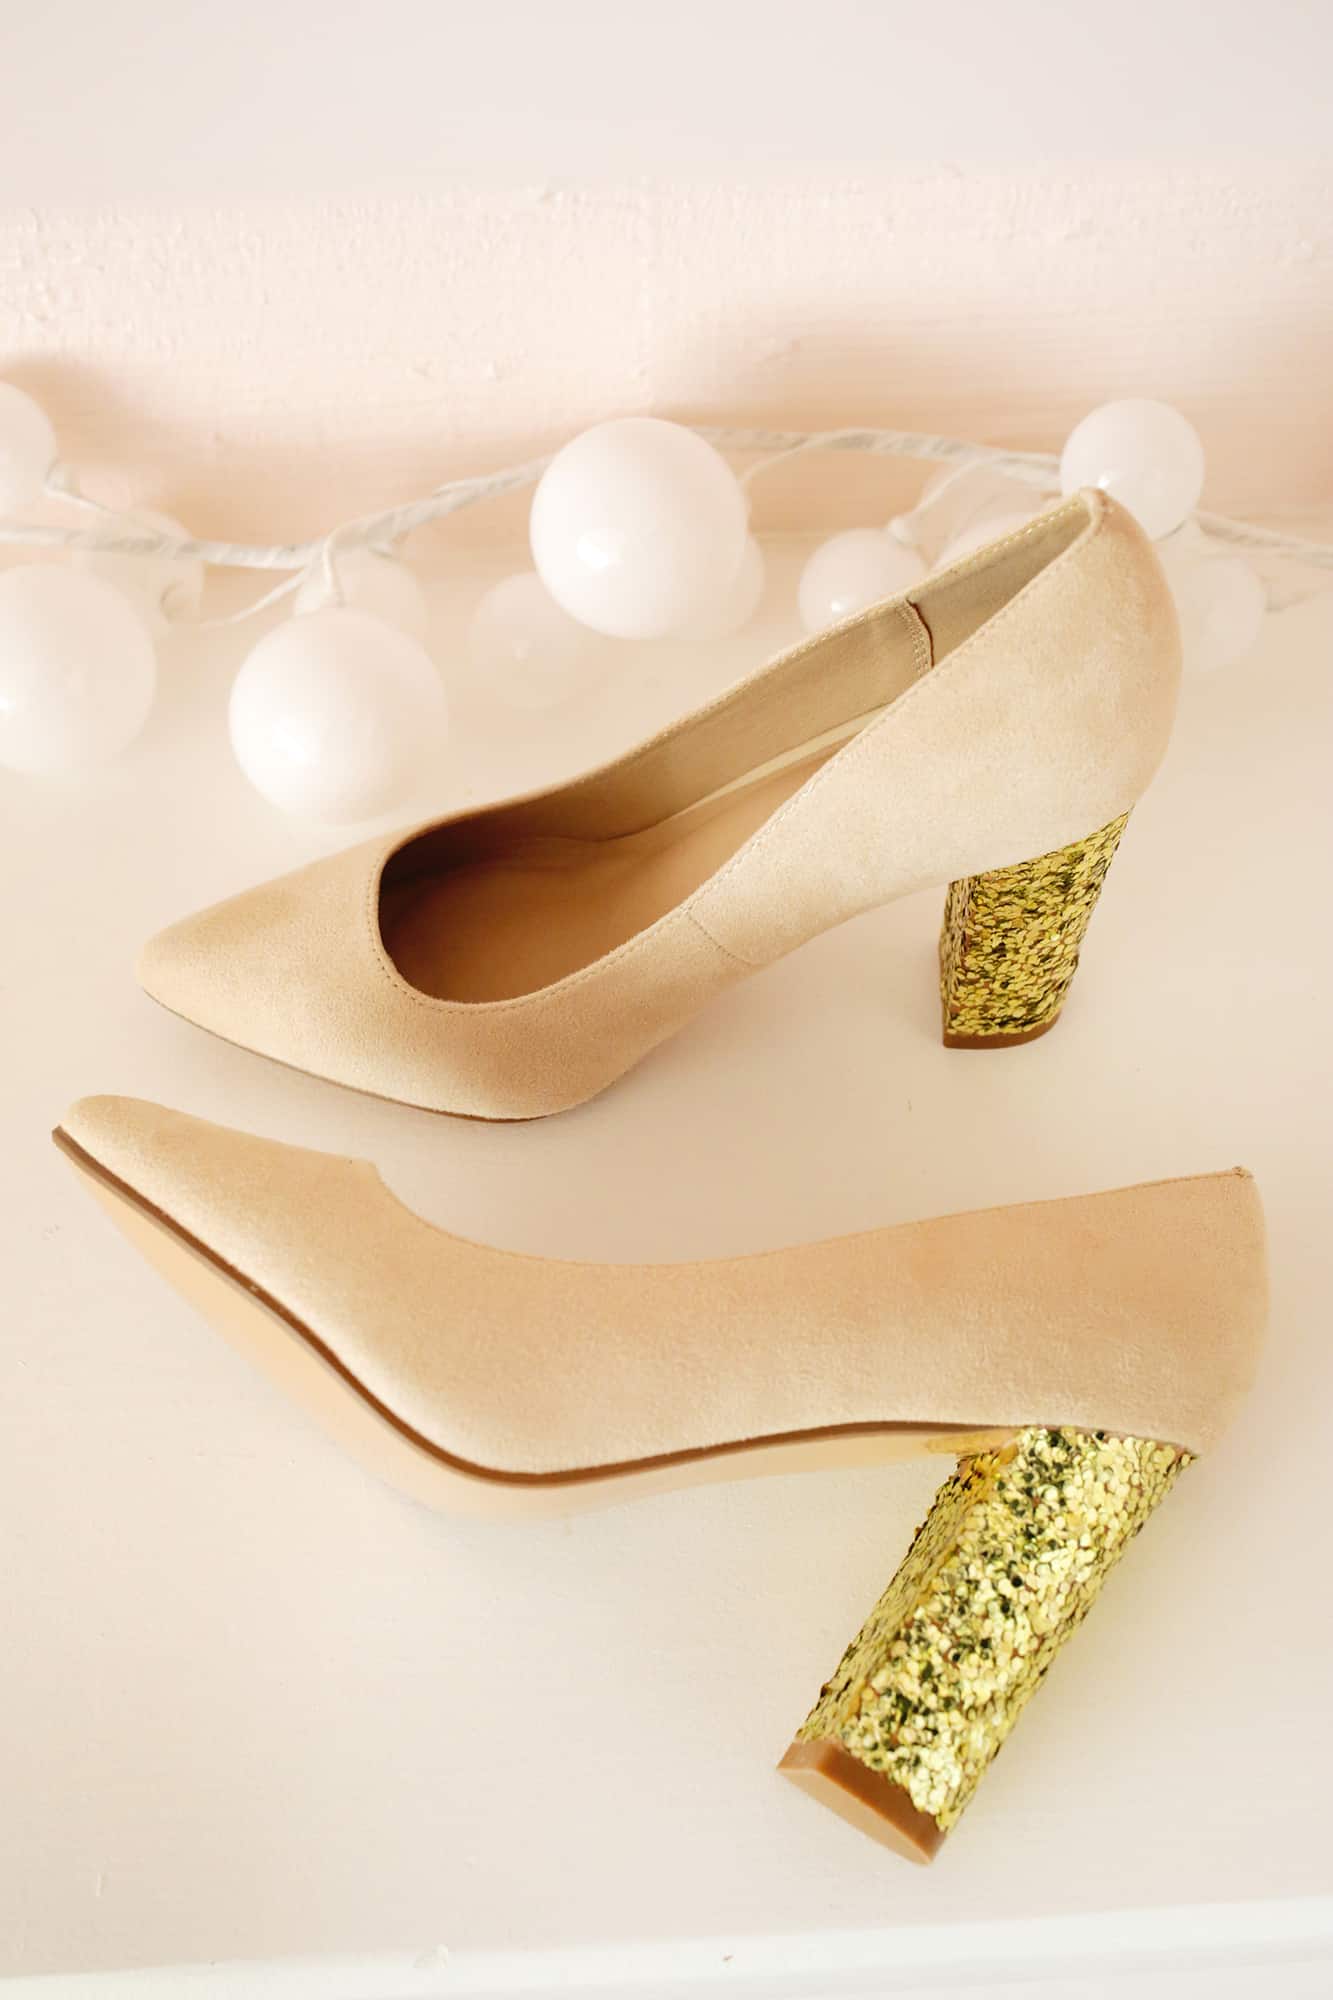 How to Make Glitter Shoes. 1 1